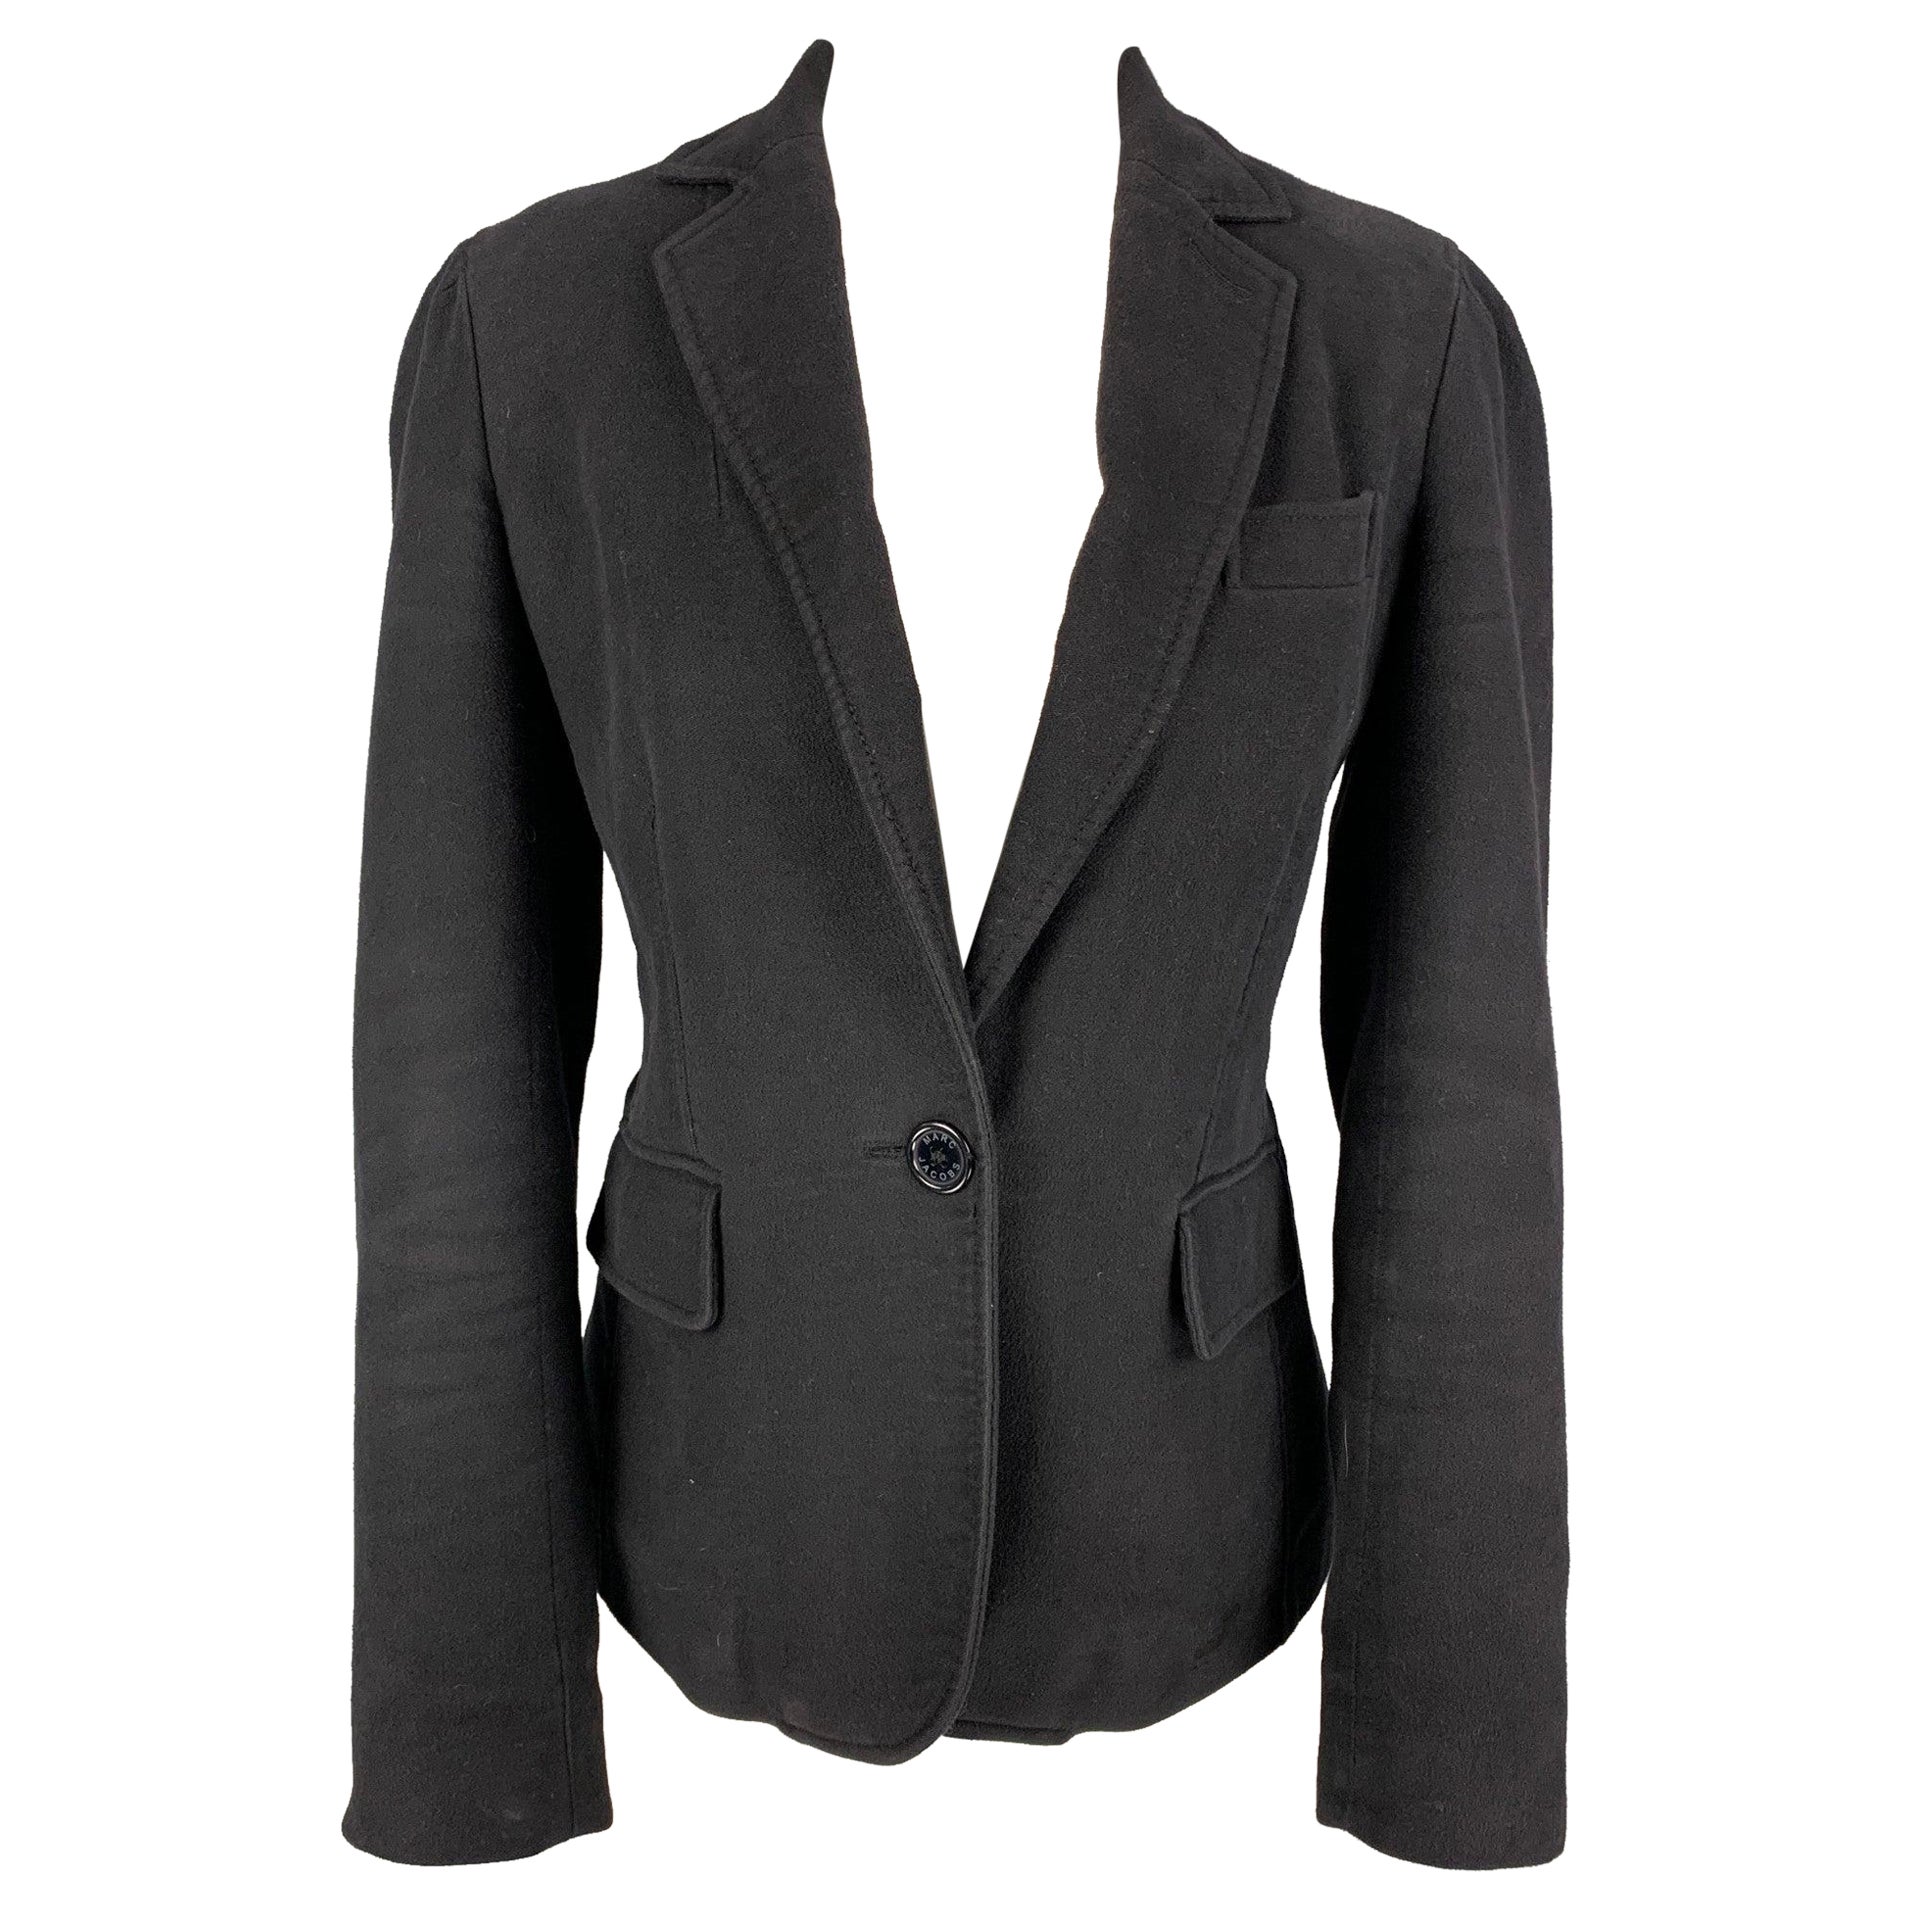 MARC by MARC JACOBS Size 8 Charcoal Cotton Jacket Blazer For Sale